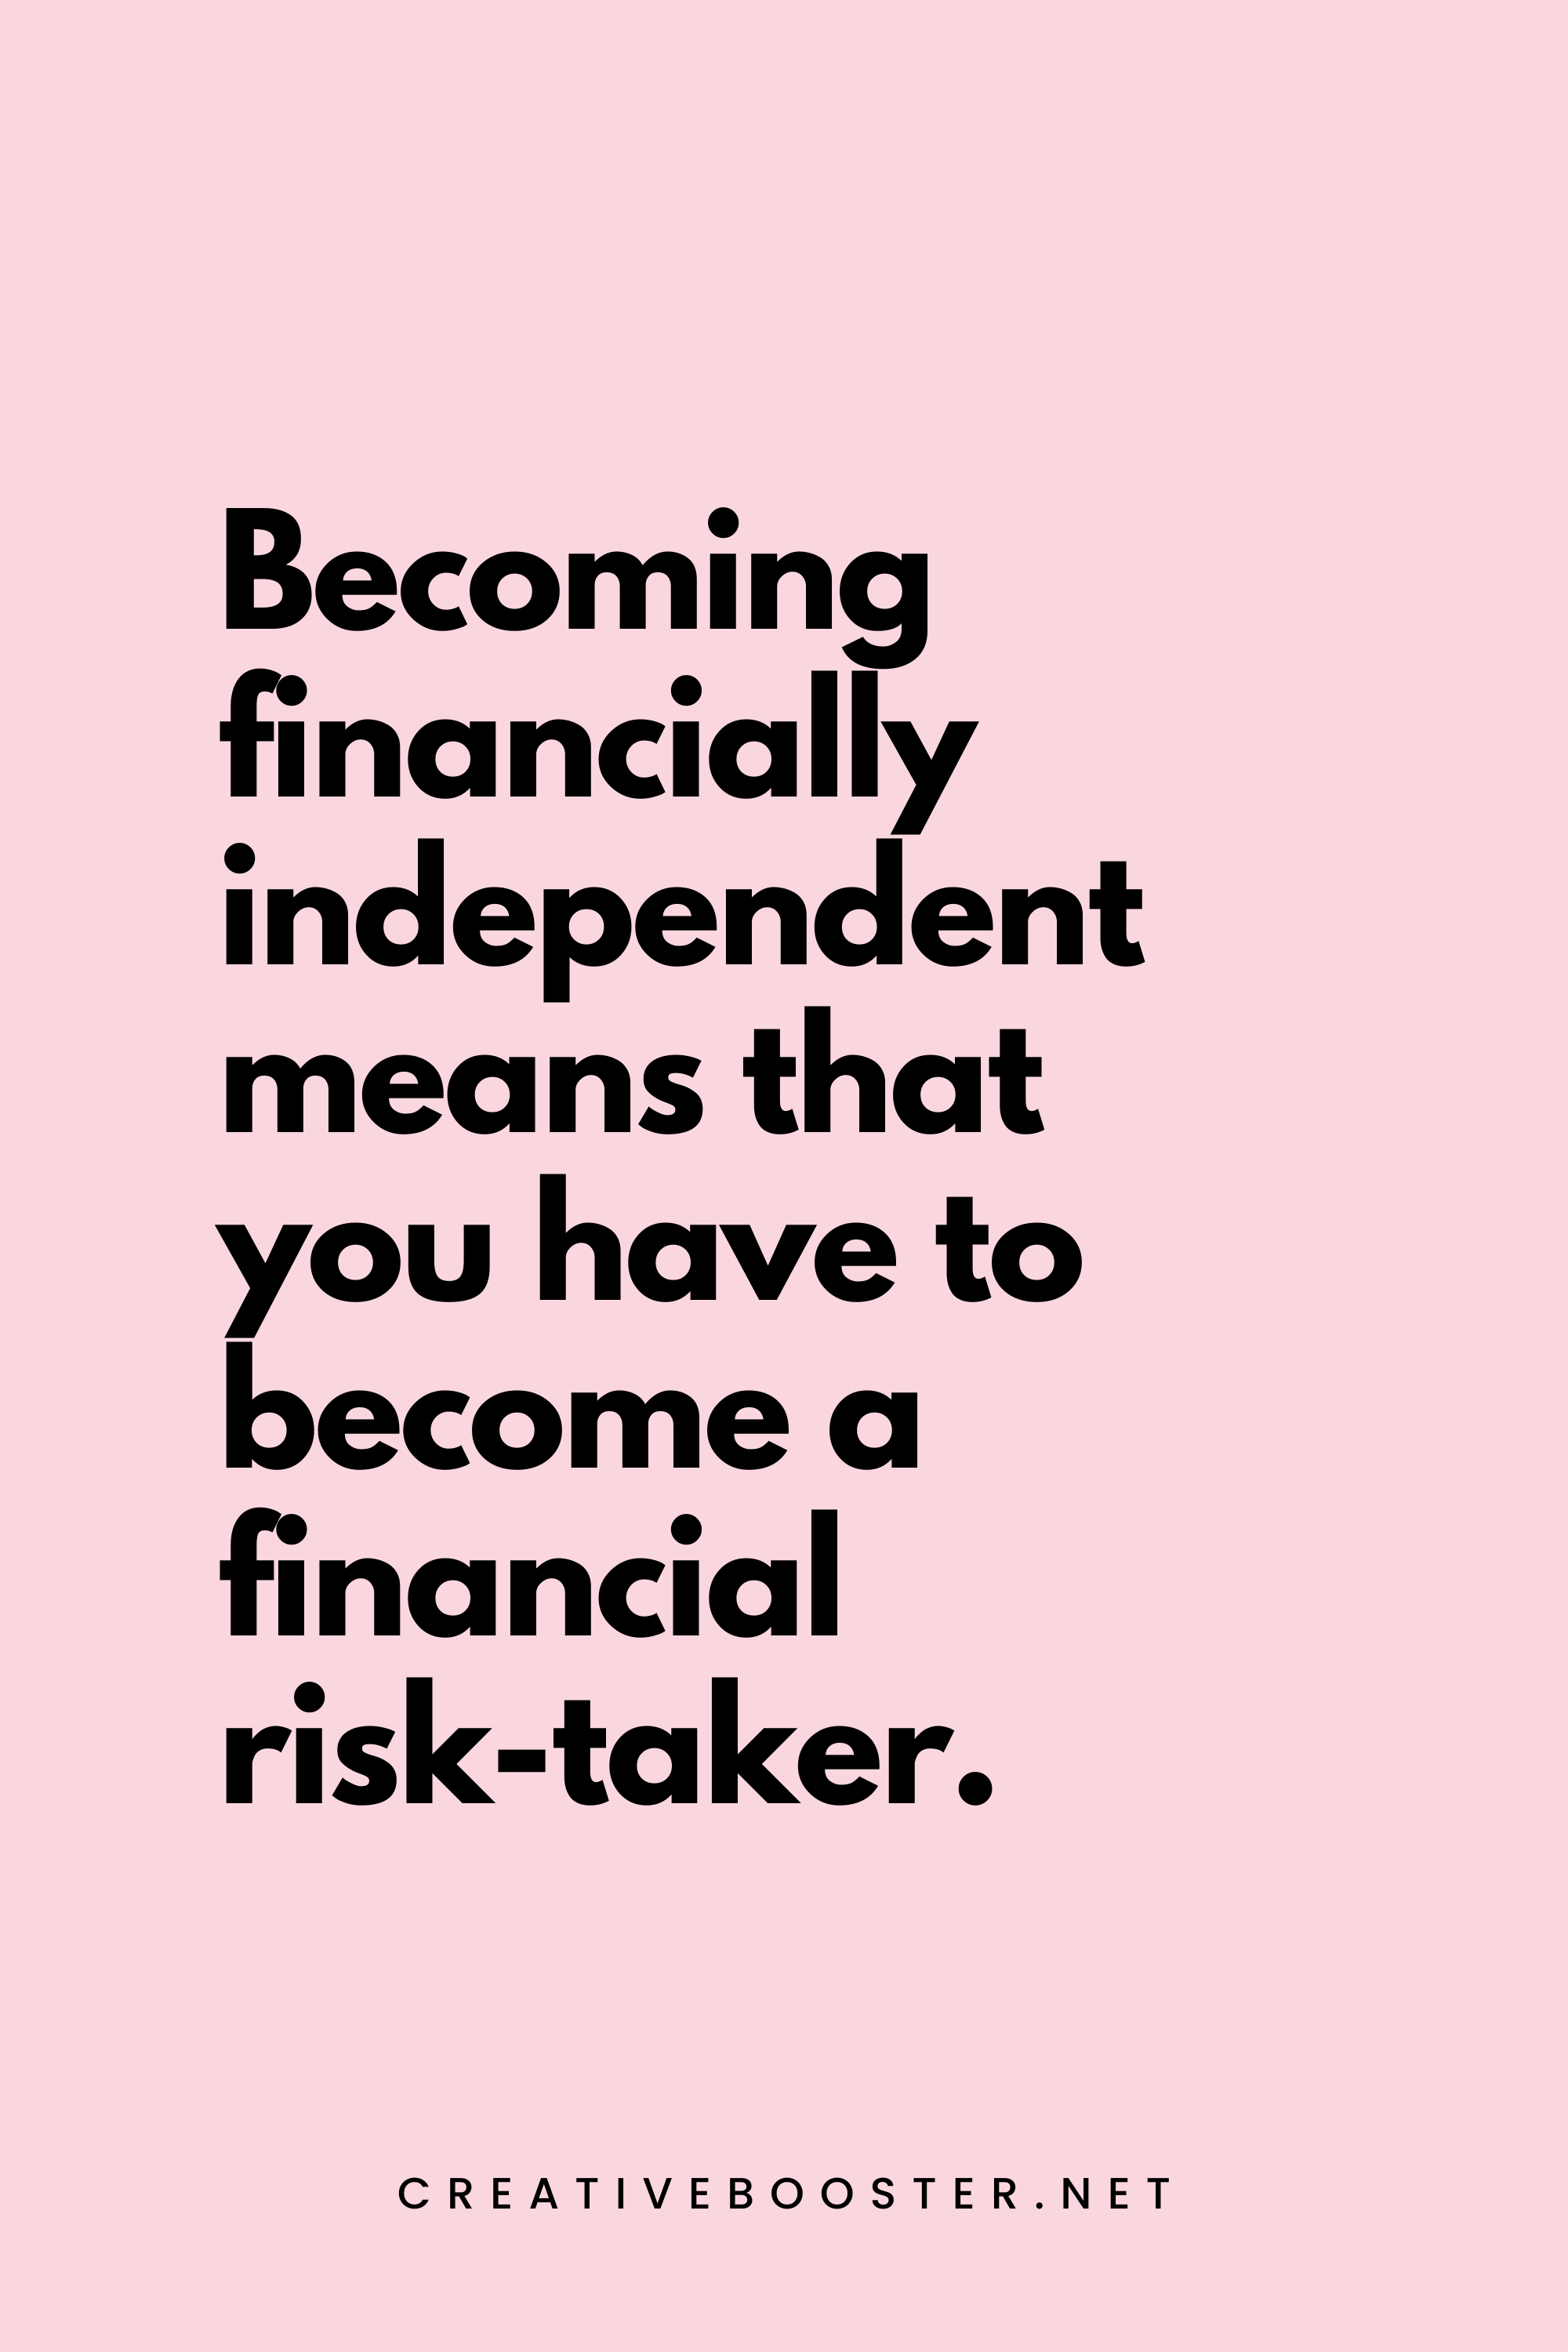 44. Becoming financially independent means that you have to become a financial risk-taker. - Carol Sankar - 4. Financial Freedom Quotes for Women